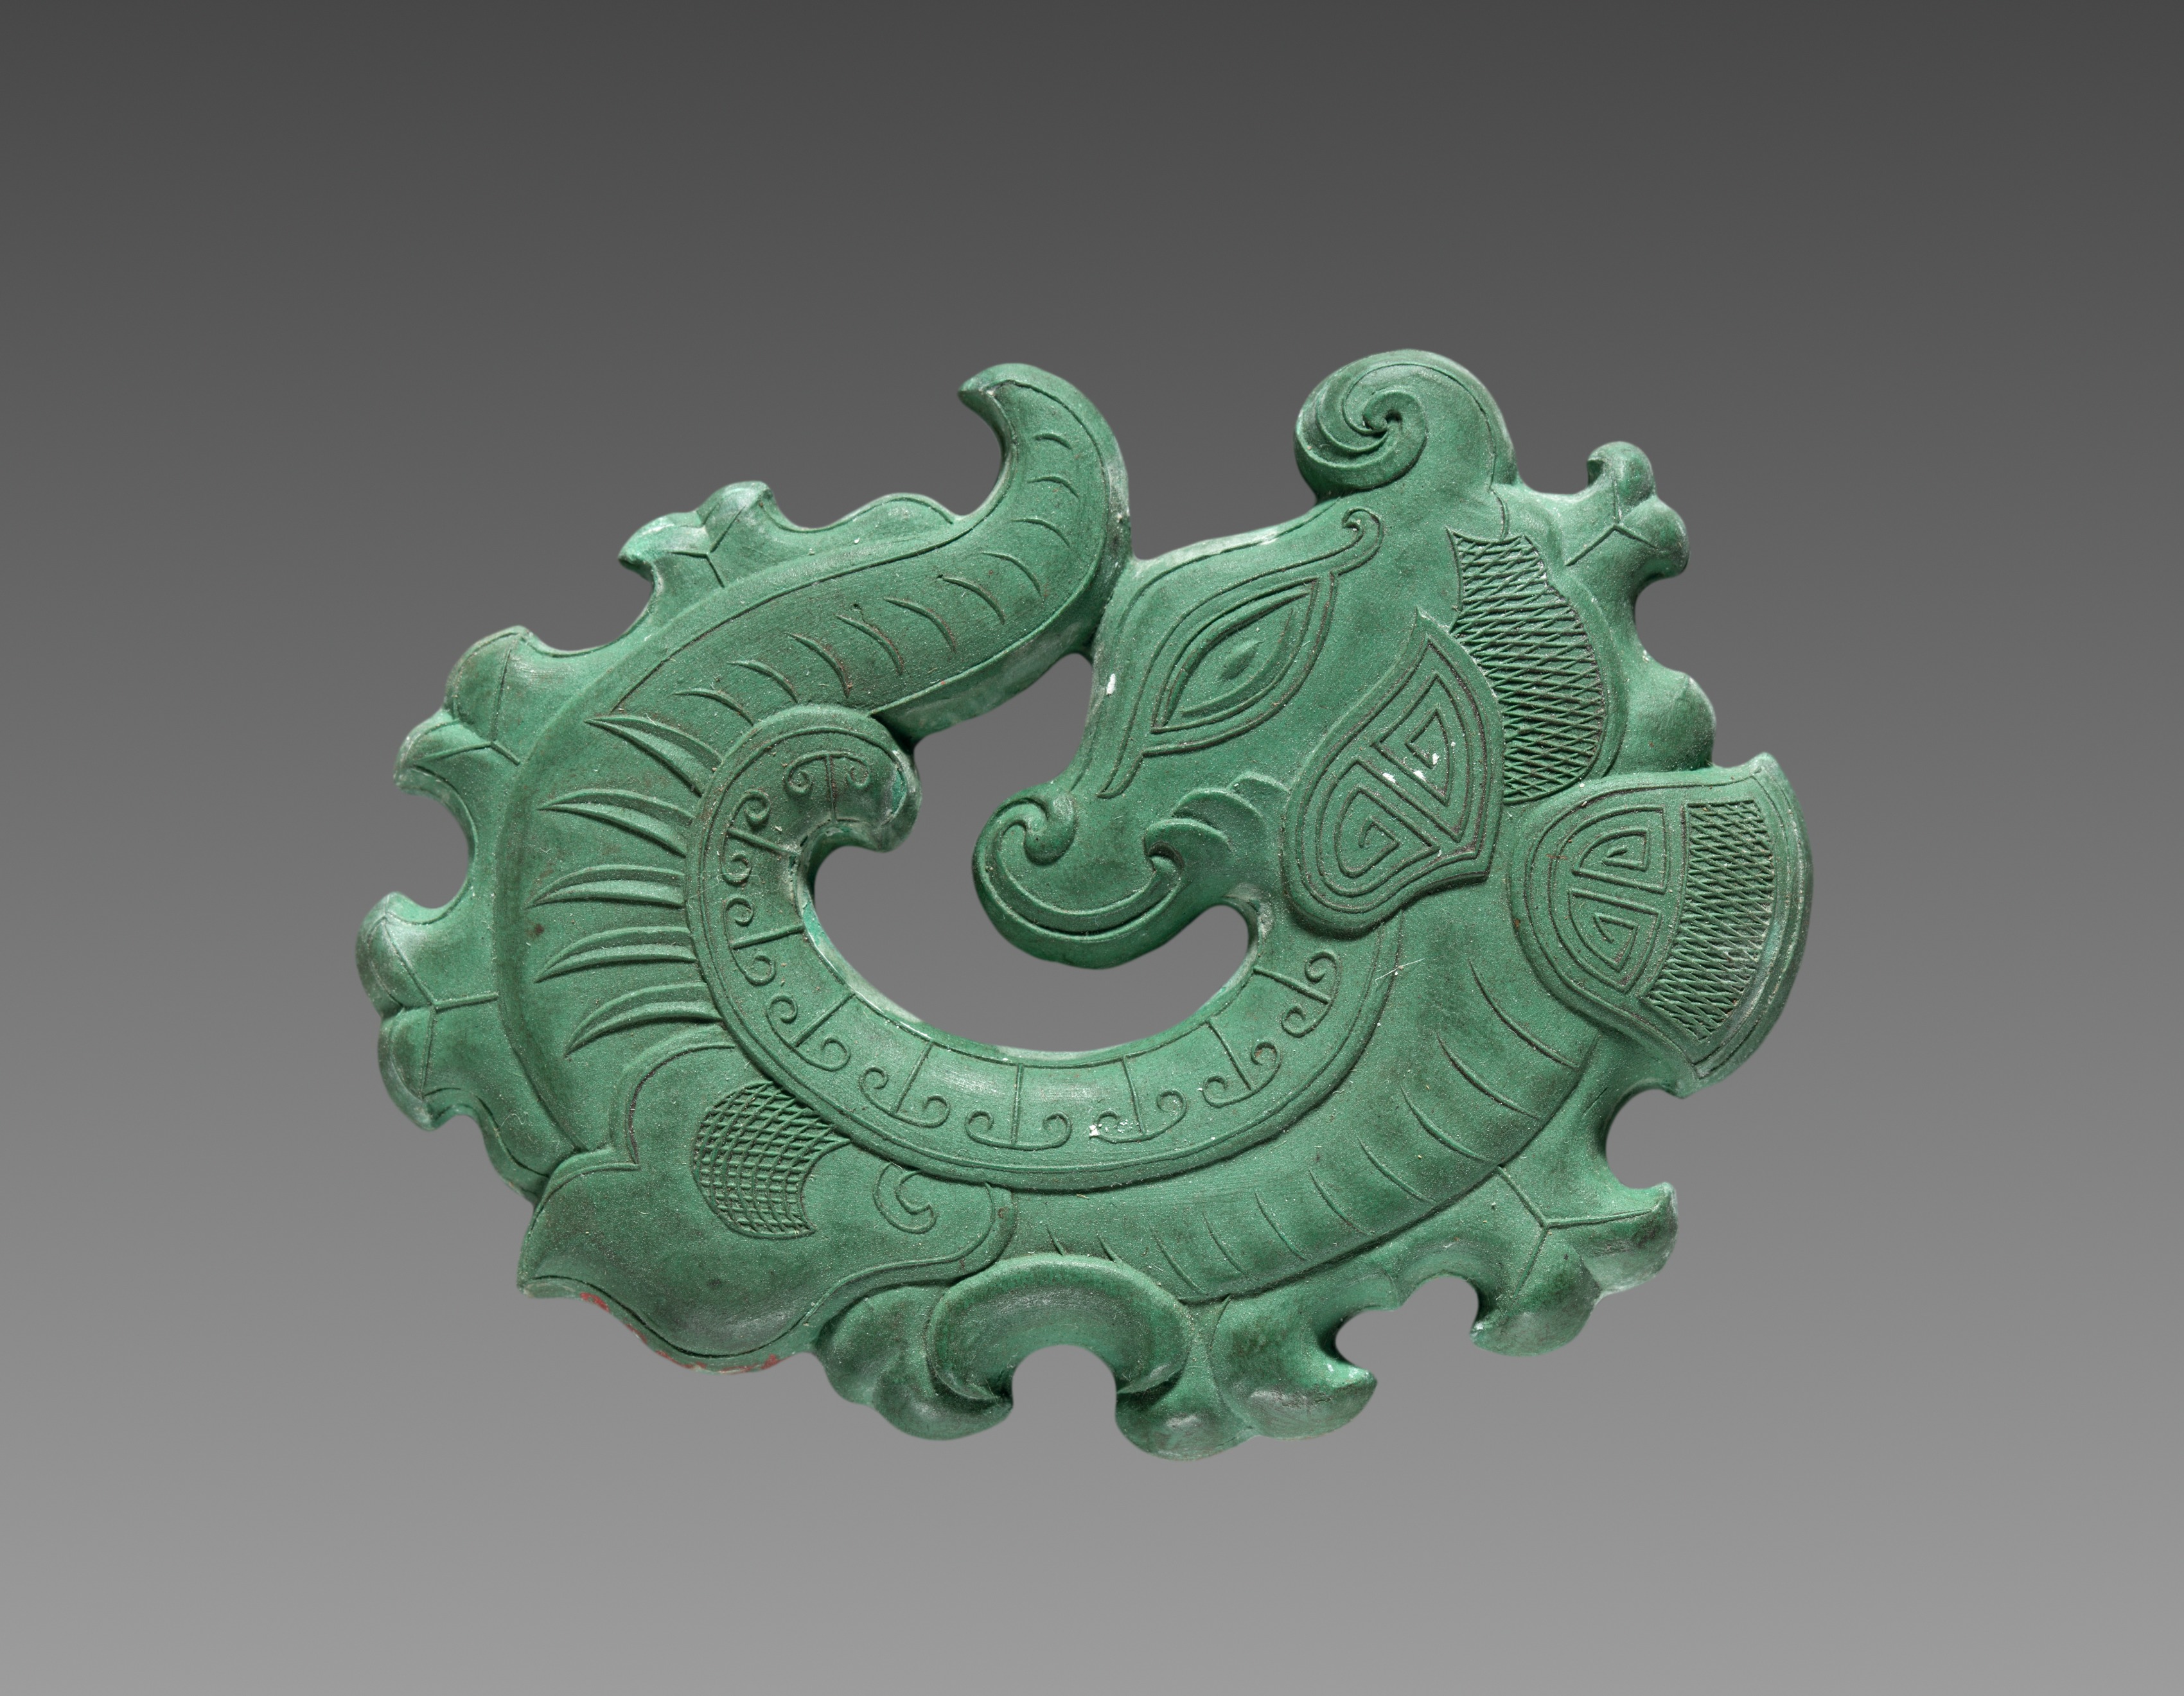 Box  with Ink Cakes:  Green Ink Cake in Shape of Coiled Dragon